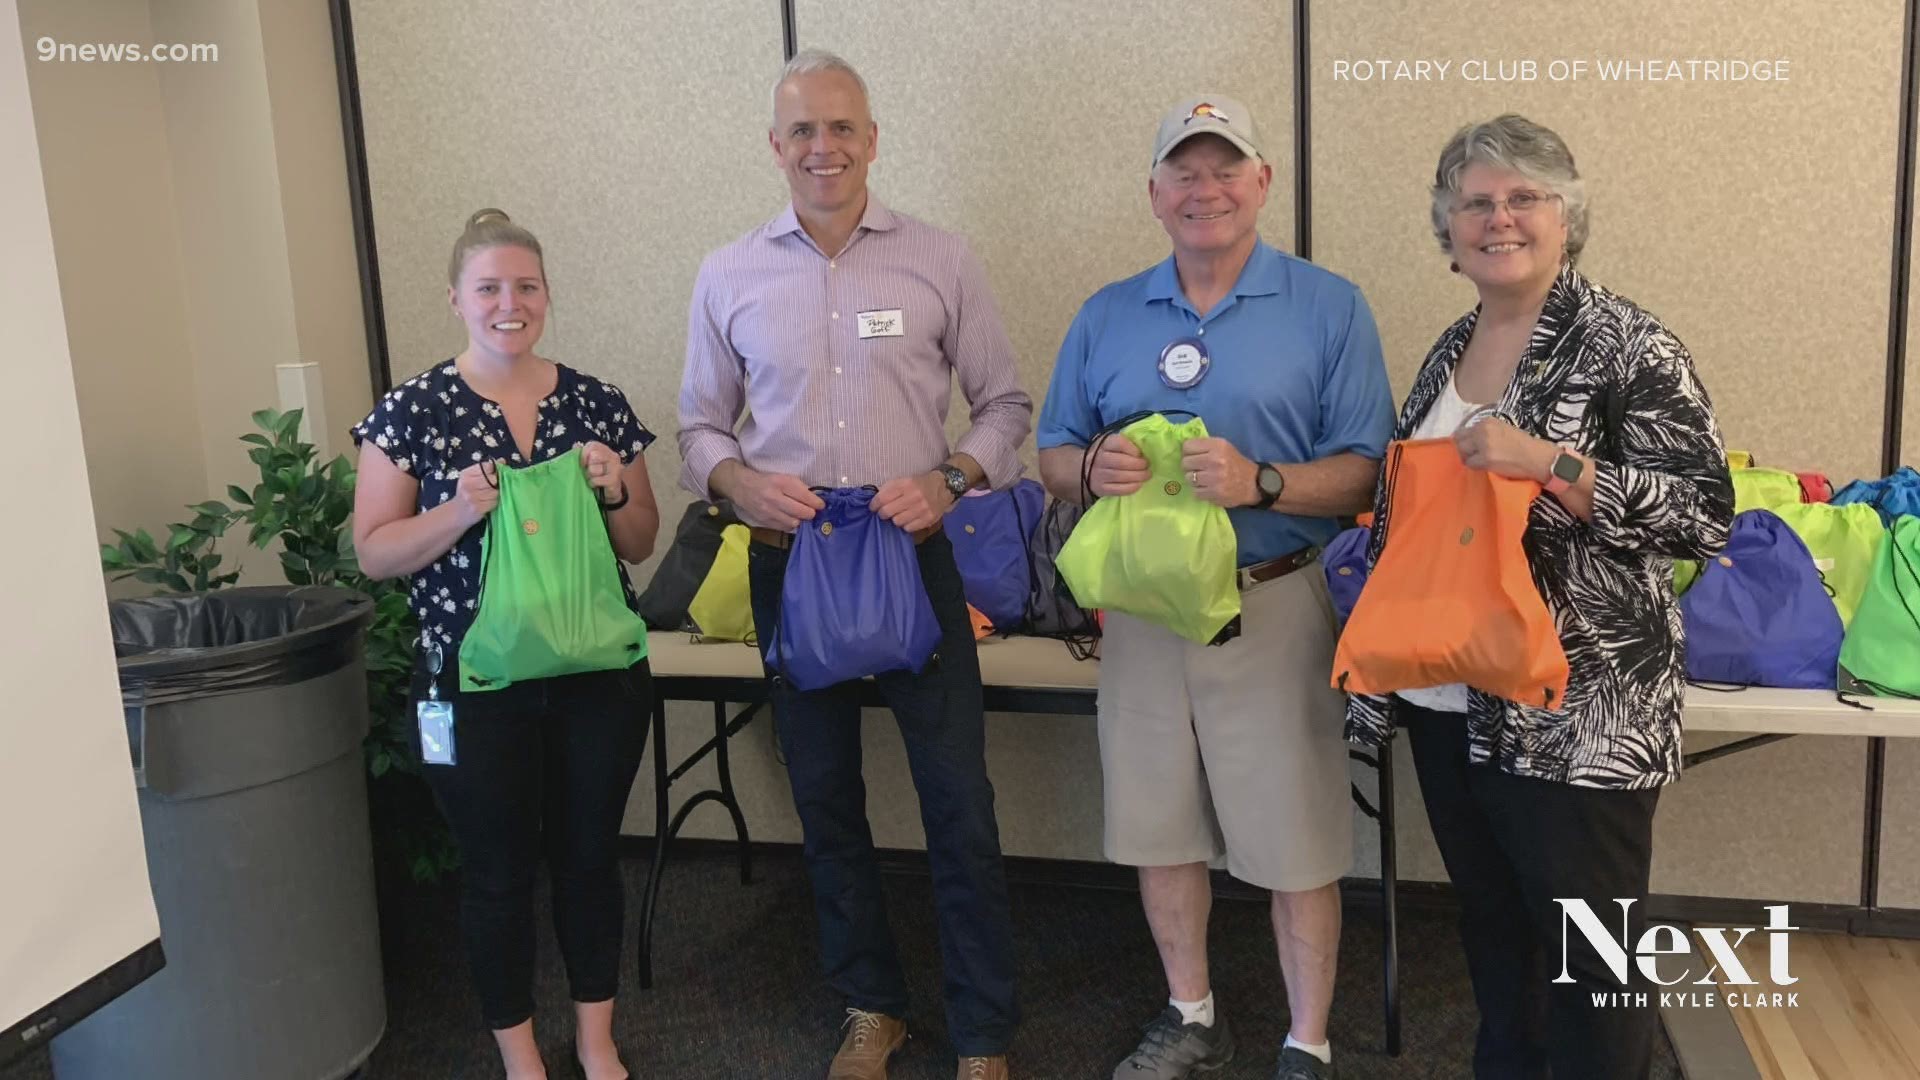 The Rotary Club of Wheat Ridge wants to get these kits to people experiencing homelessness to help set them up for success when they find housing.